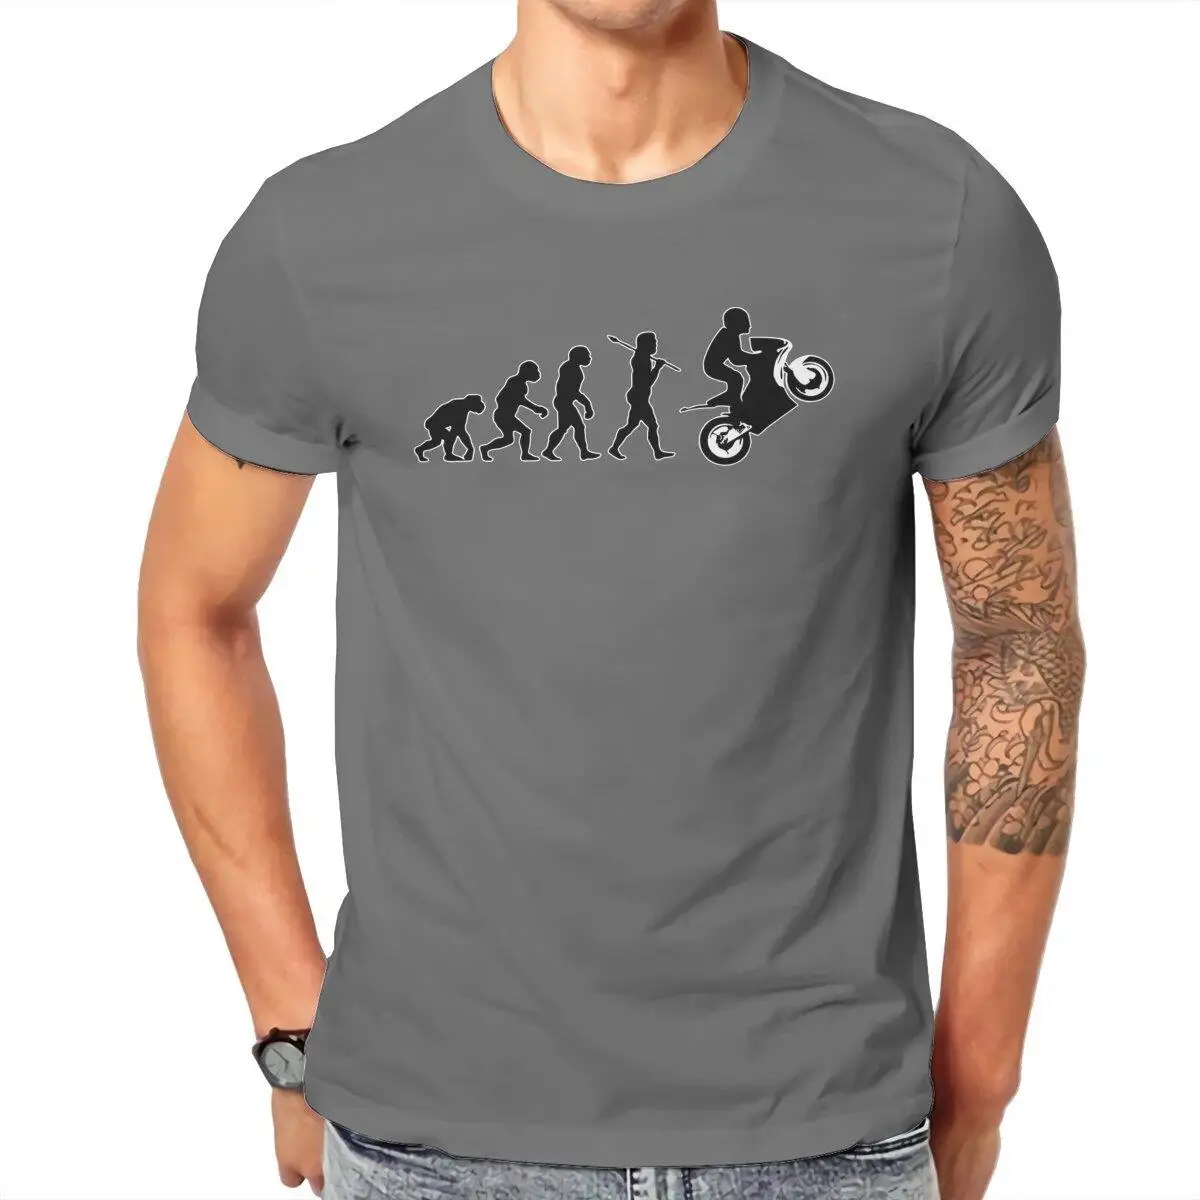 Dirtbike Evolution  T-Shirt for Men  Funny Cotton Tees O Neck Short Sleeve T Shirts Gift Idea Clothes